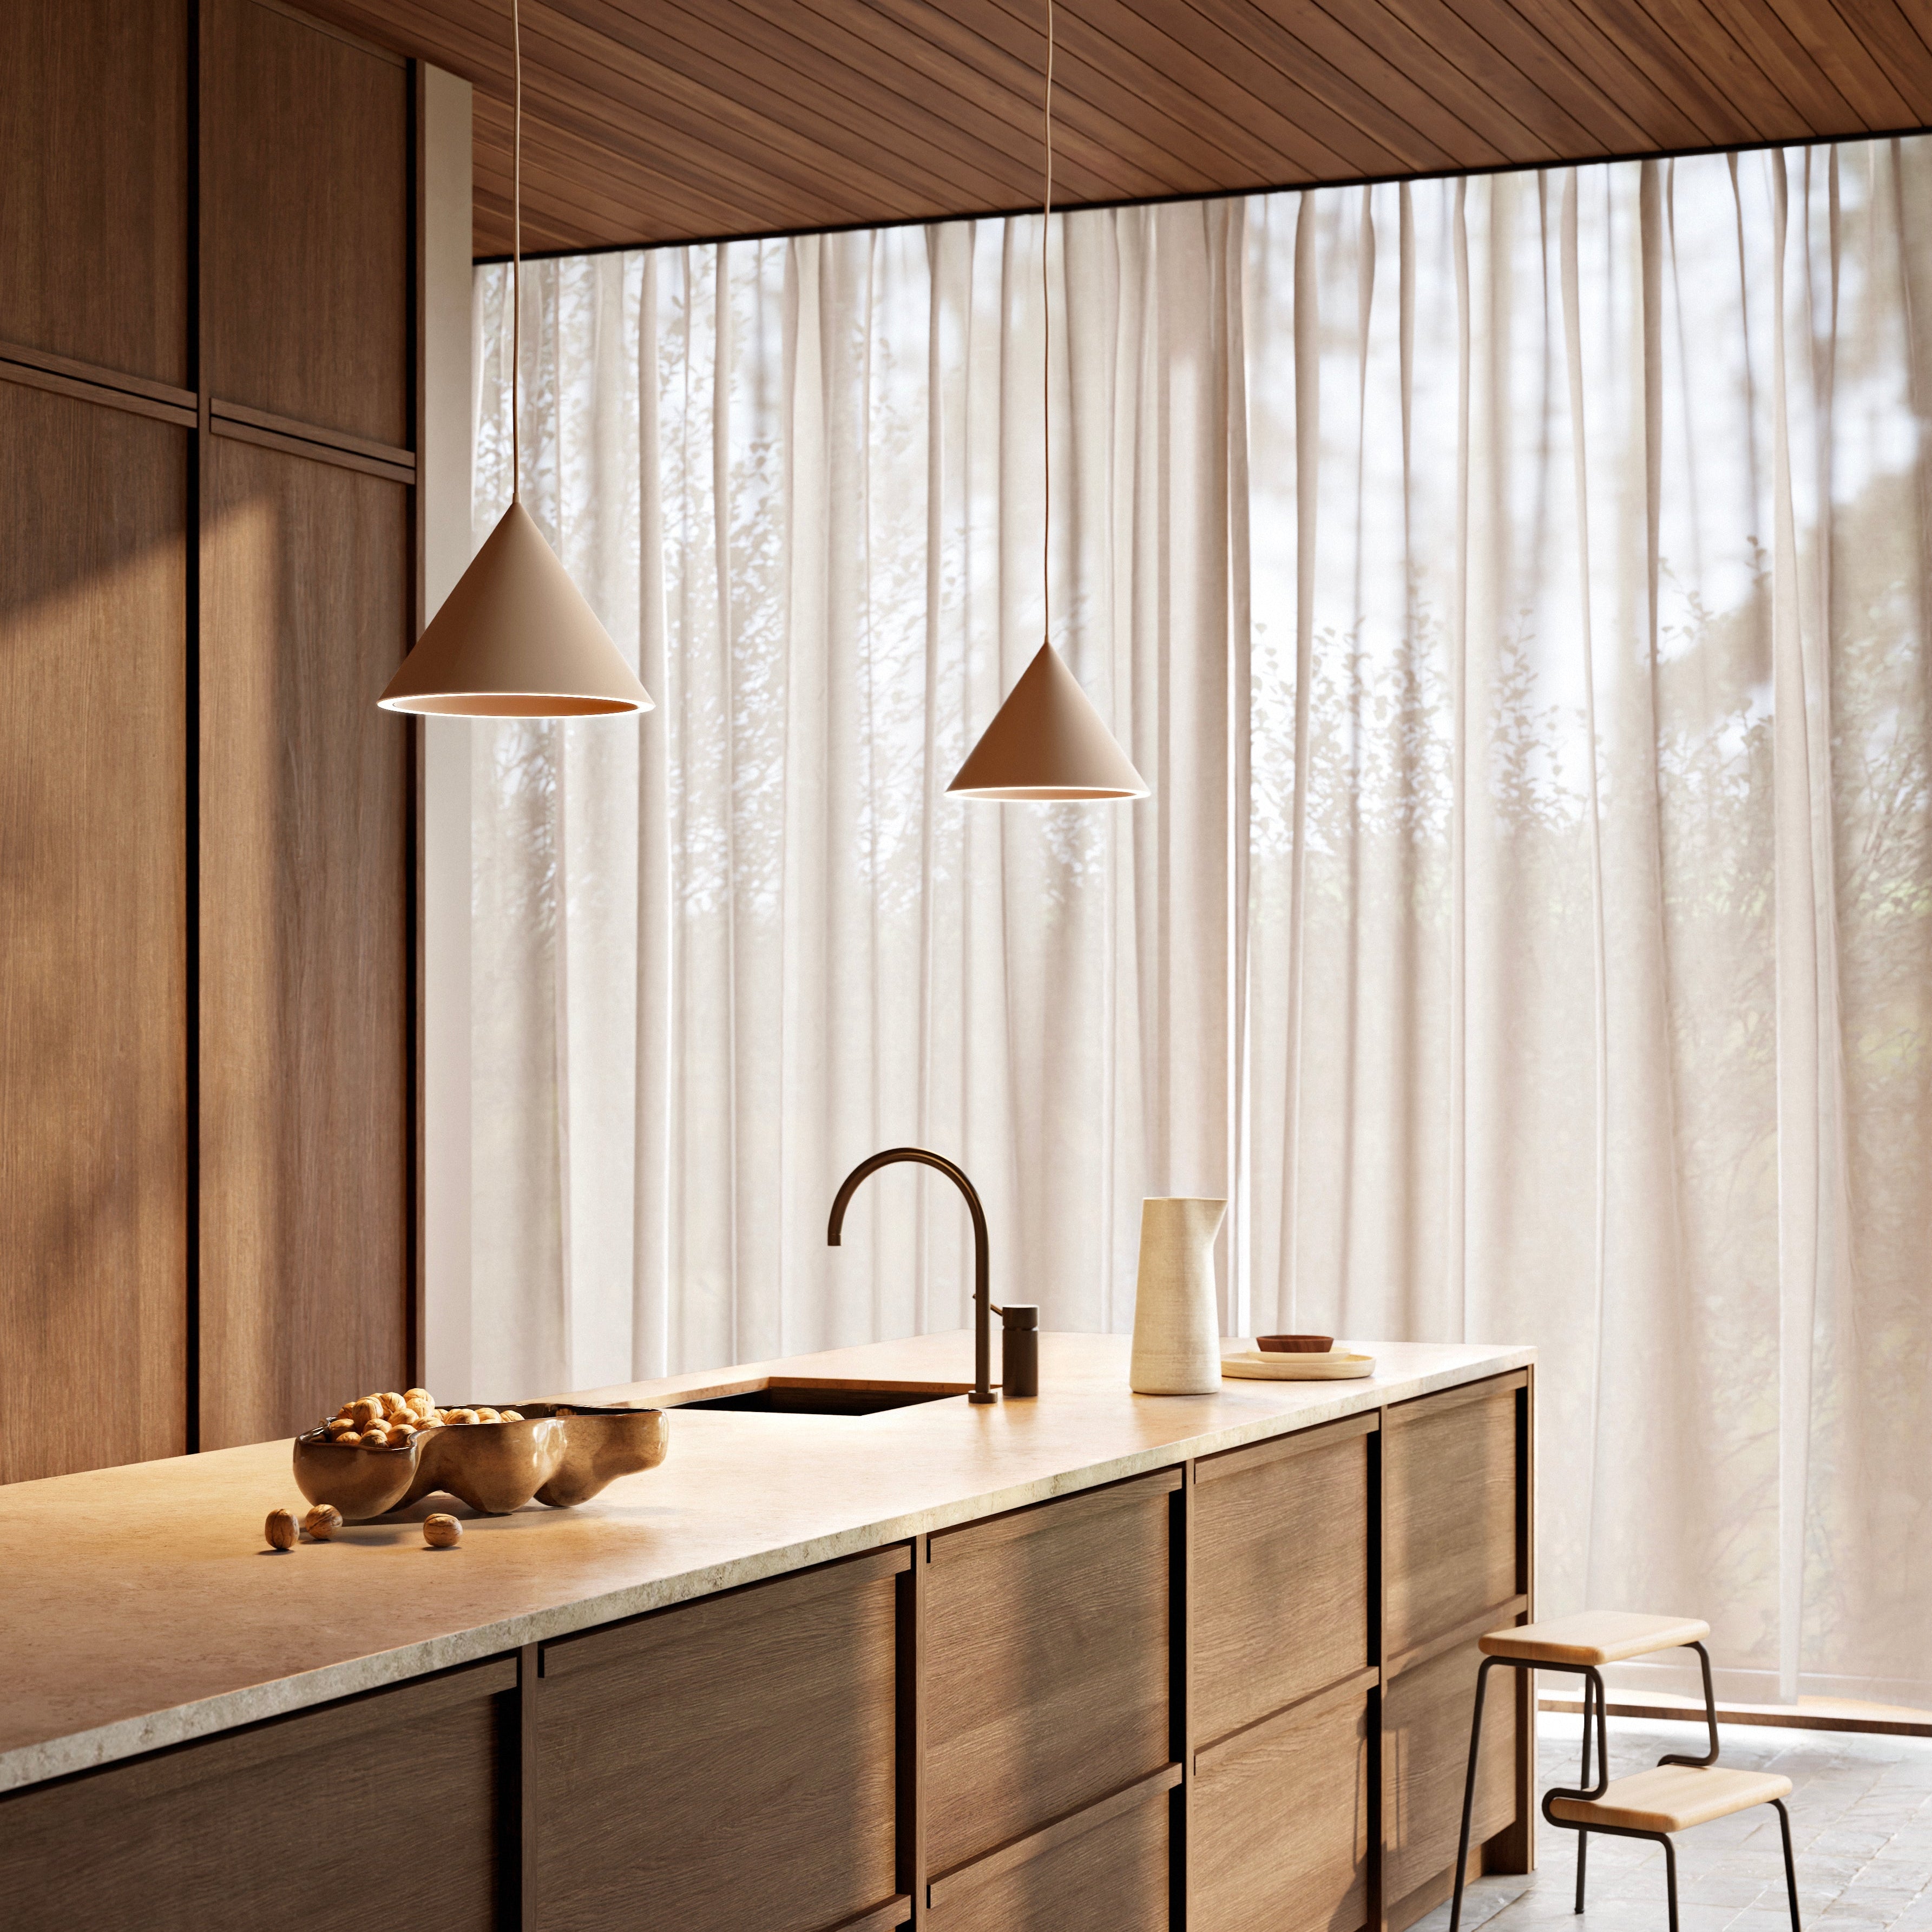 annular pendant small beige by Woud on adorn.house